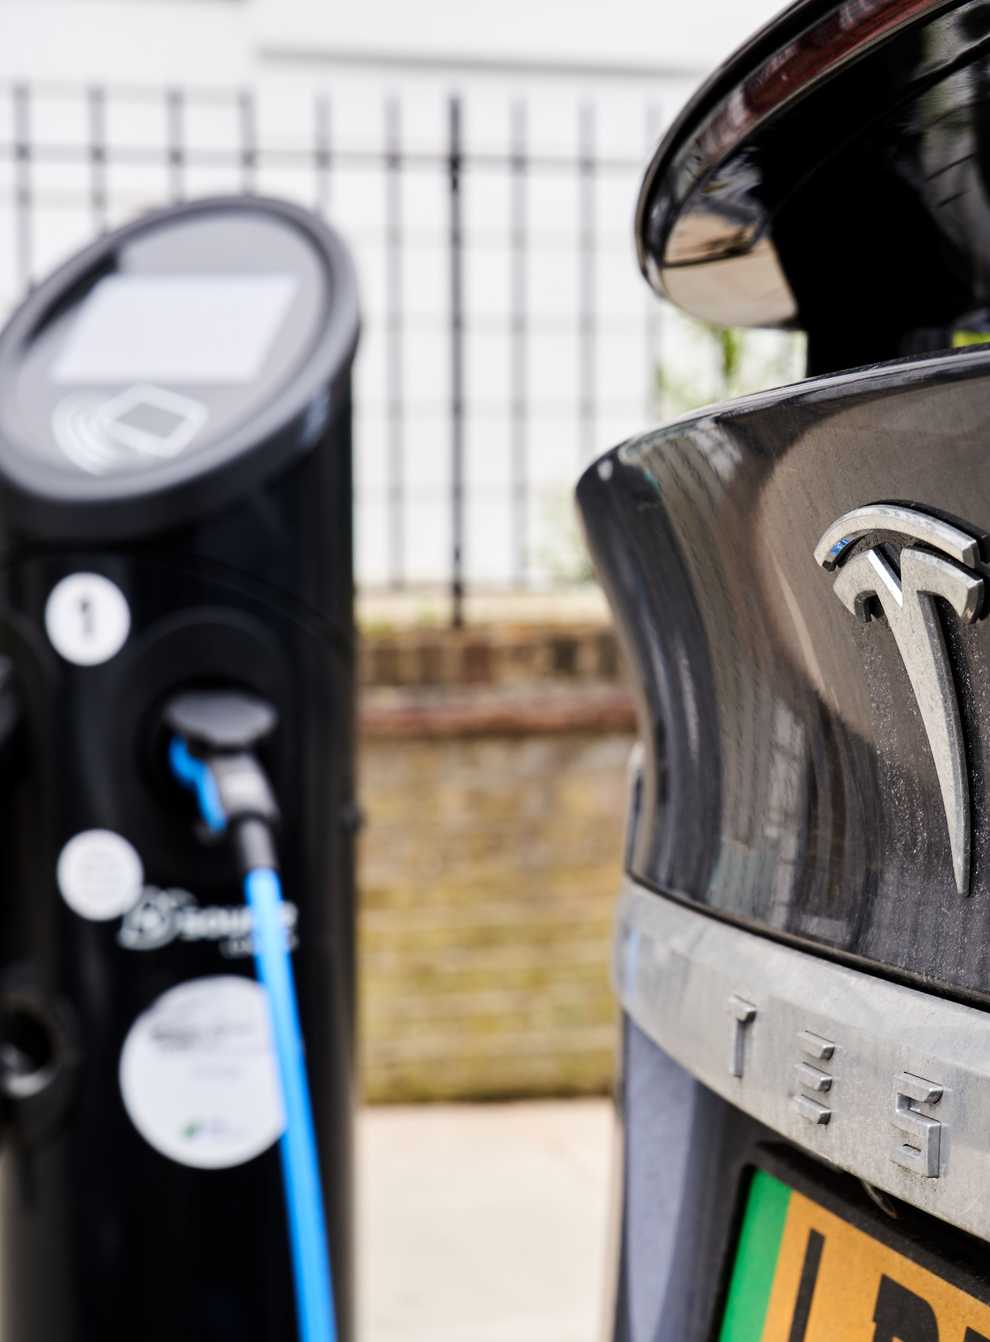 Figures show fewer than 9,000 public electric vehicle charging devices were installed in the UK last year (John Walton/PA)